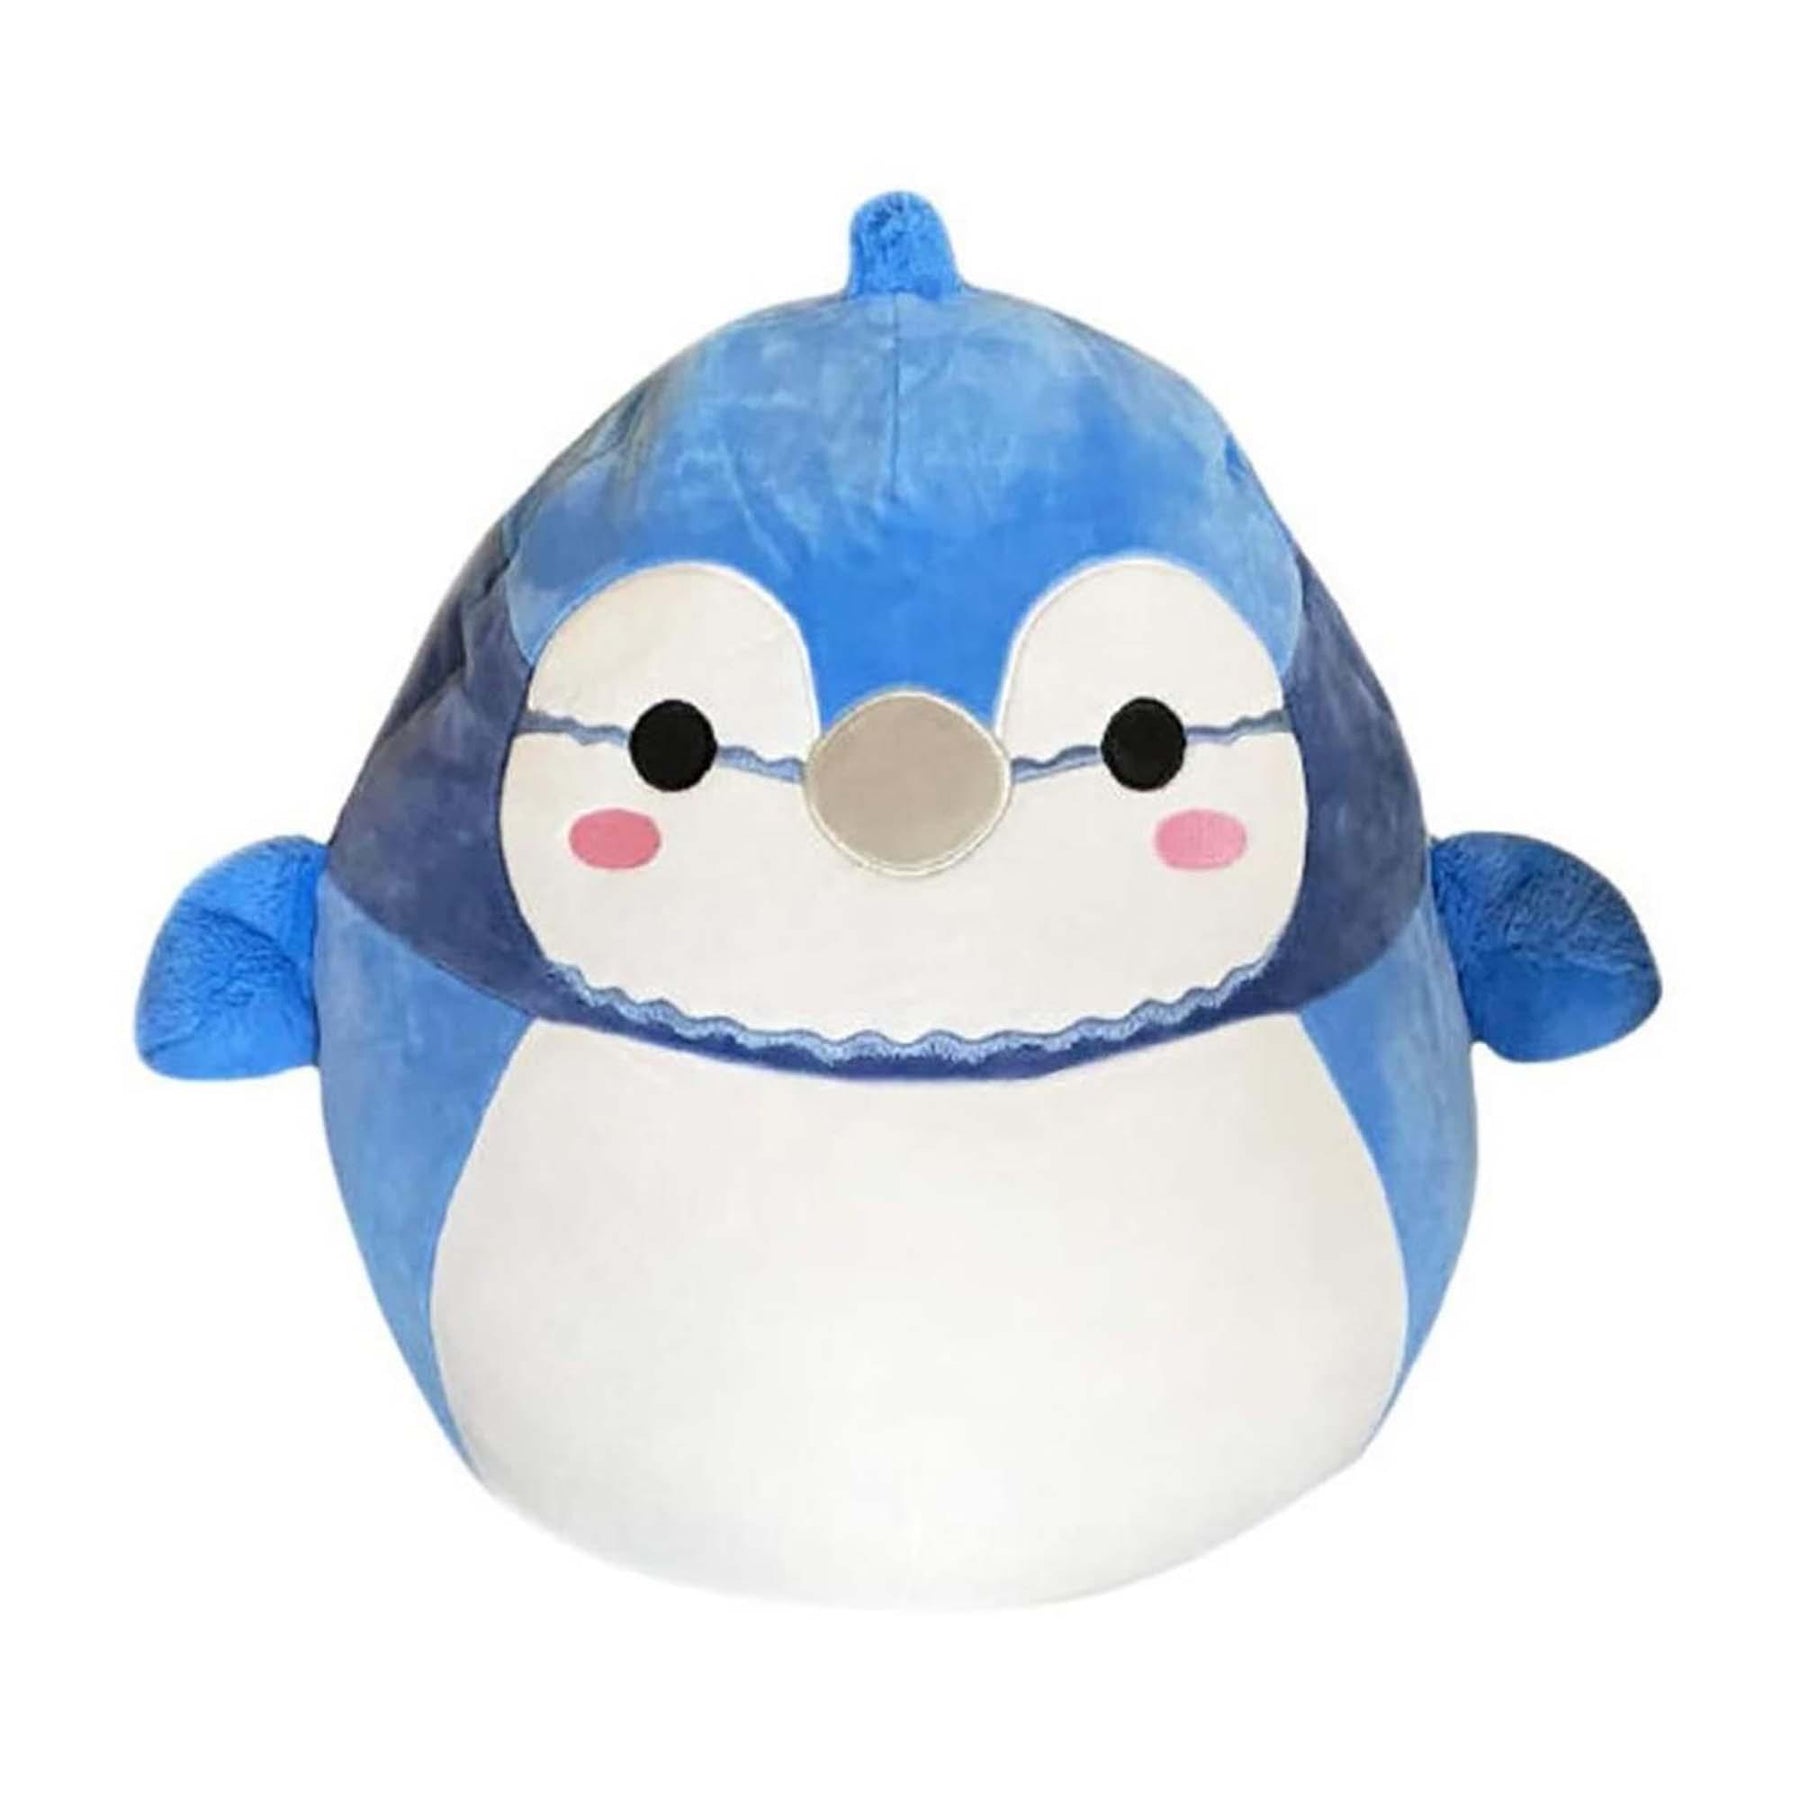 Squishmallow 8 Inch Plush | Babs the Blue Jay